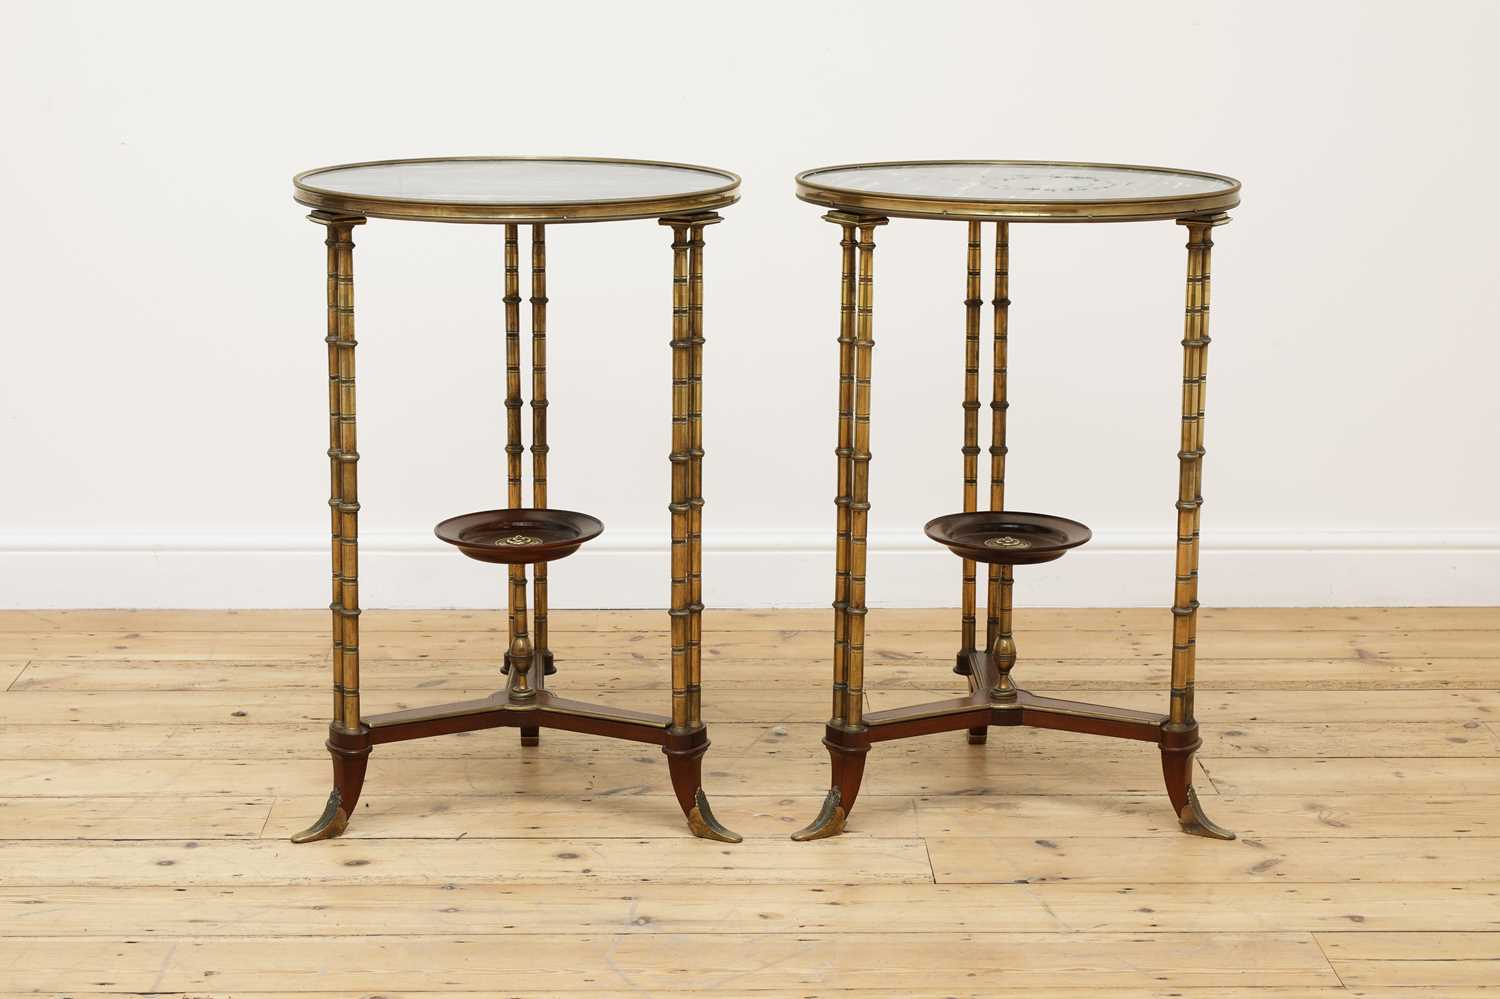 Lot 80 - A pair of French Louis XVI-style marble and bronze guéridons